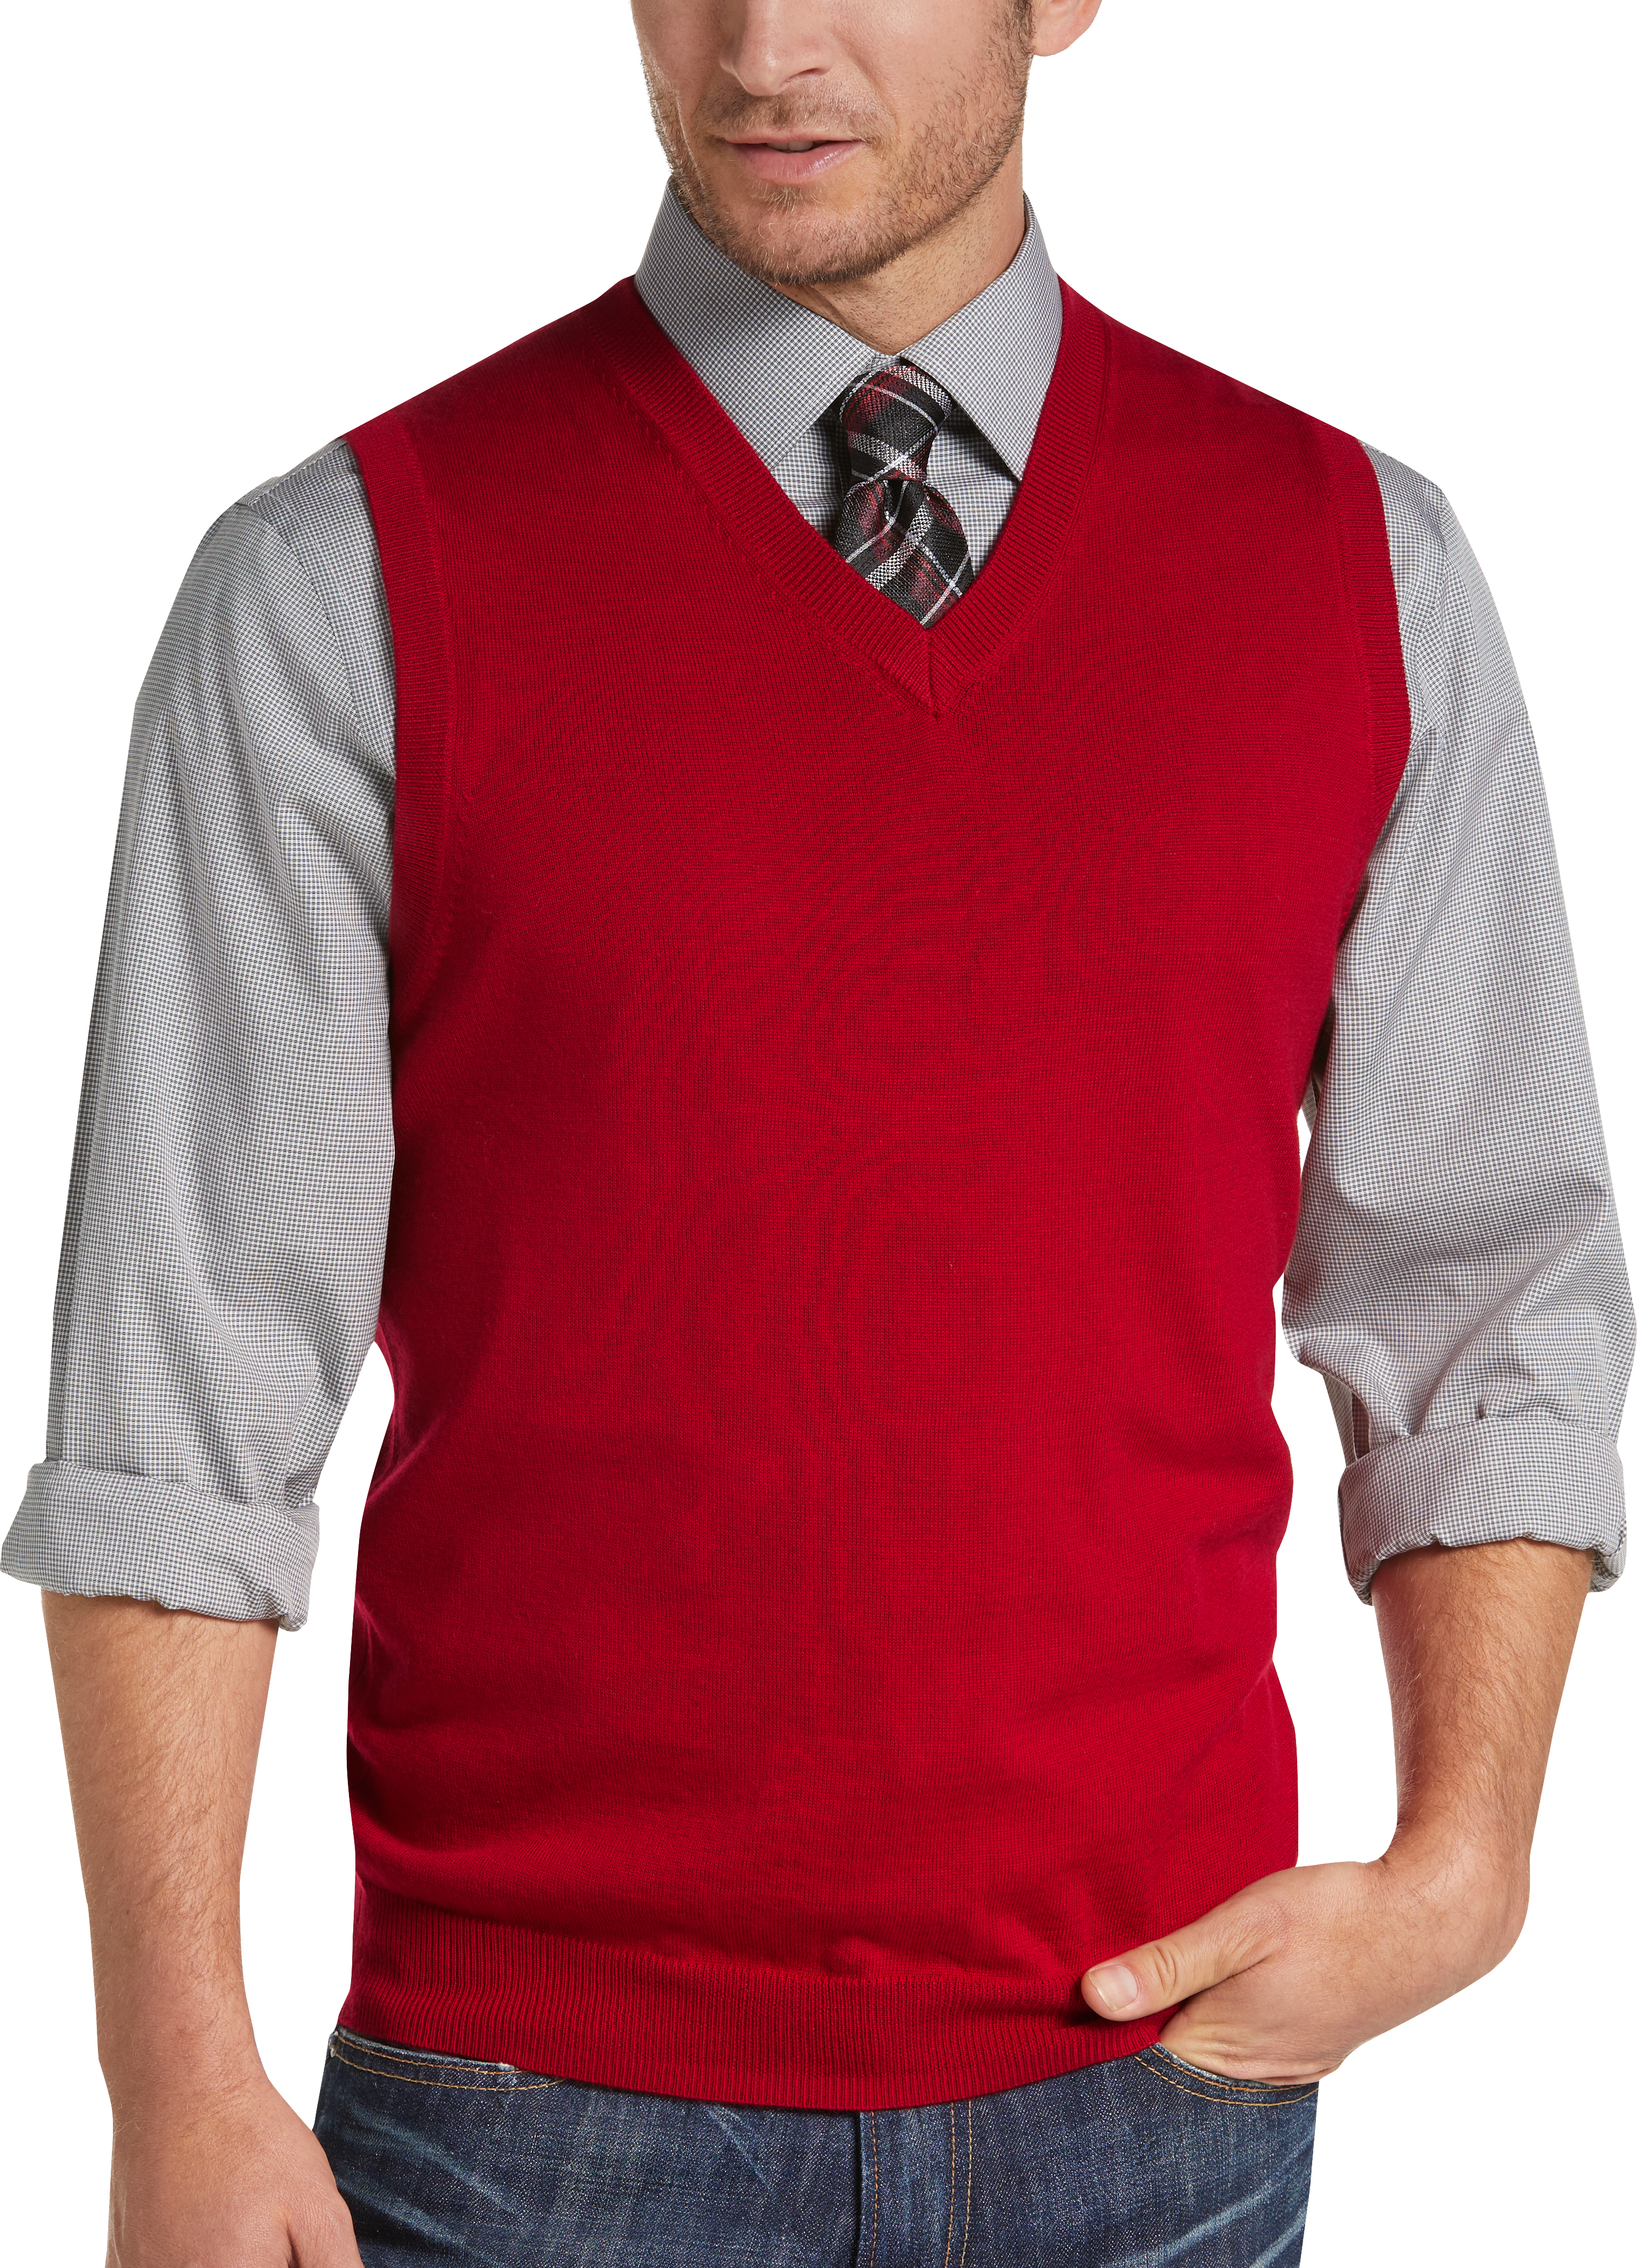 Red Sweater Vest | Mens Wearhouse